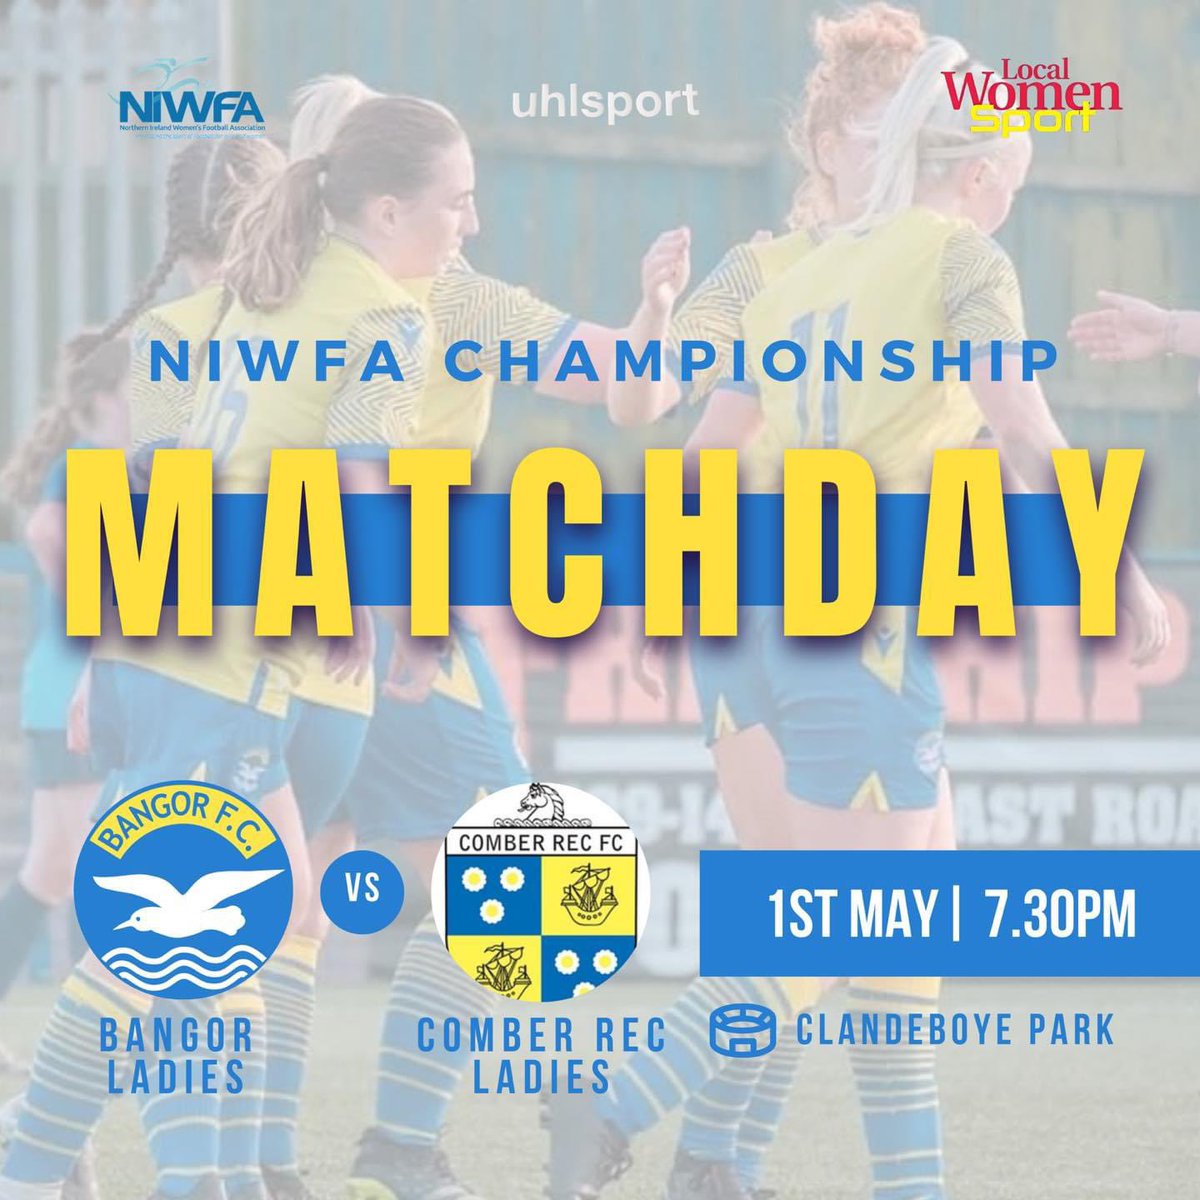 ⚽️ It’s a quick turnaround for Bangor Ladies who are back at Clandeboye Park tonight. 🏆 NIWFA Championship 🆚 Comber Rec Ladies 📆 Tonight 🏟 Clandeboye Park ⏳ 7.30pm 💷 Adults £3, Consession £2, under 16s free 🟡🔵 #niwfa #niwfa2024 #LWSsupercup #uhlsport